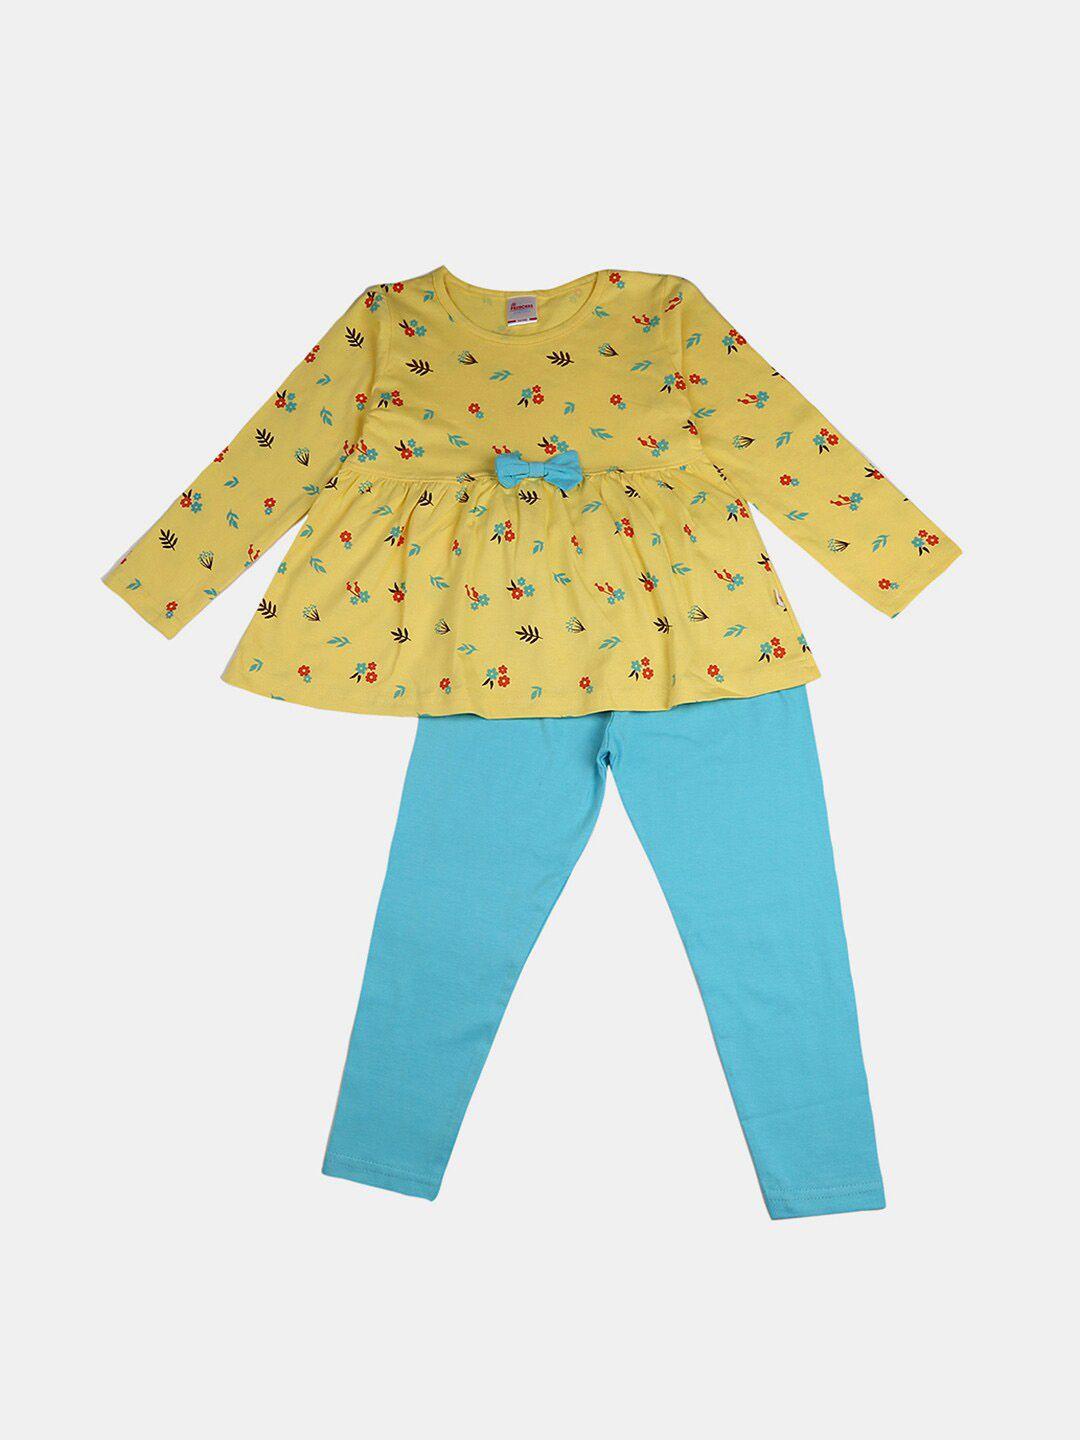 v-mart-kids-pure-cotton-printed-t-shirt-with-trousers